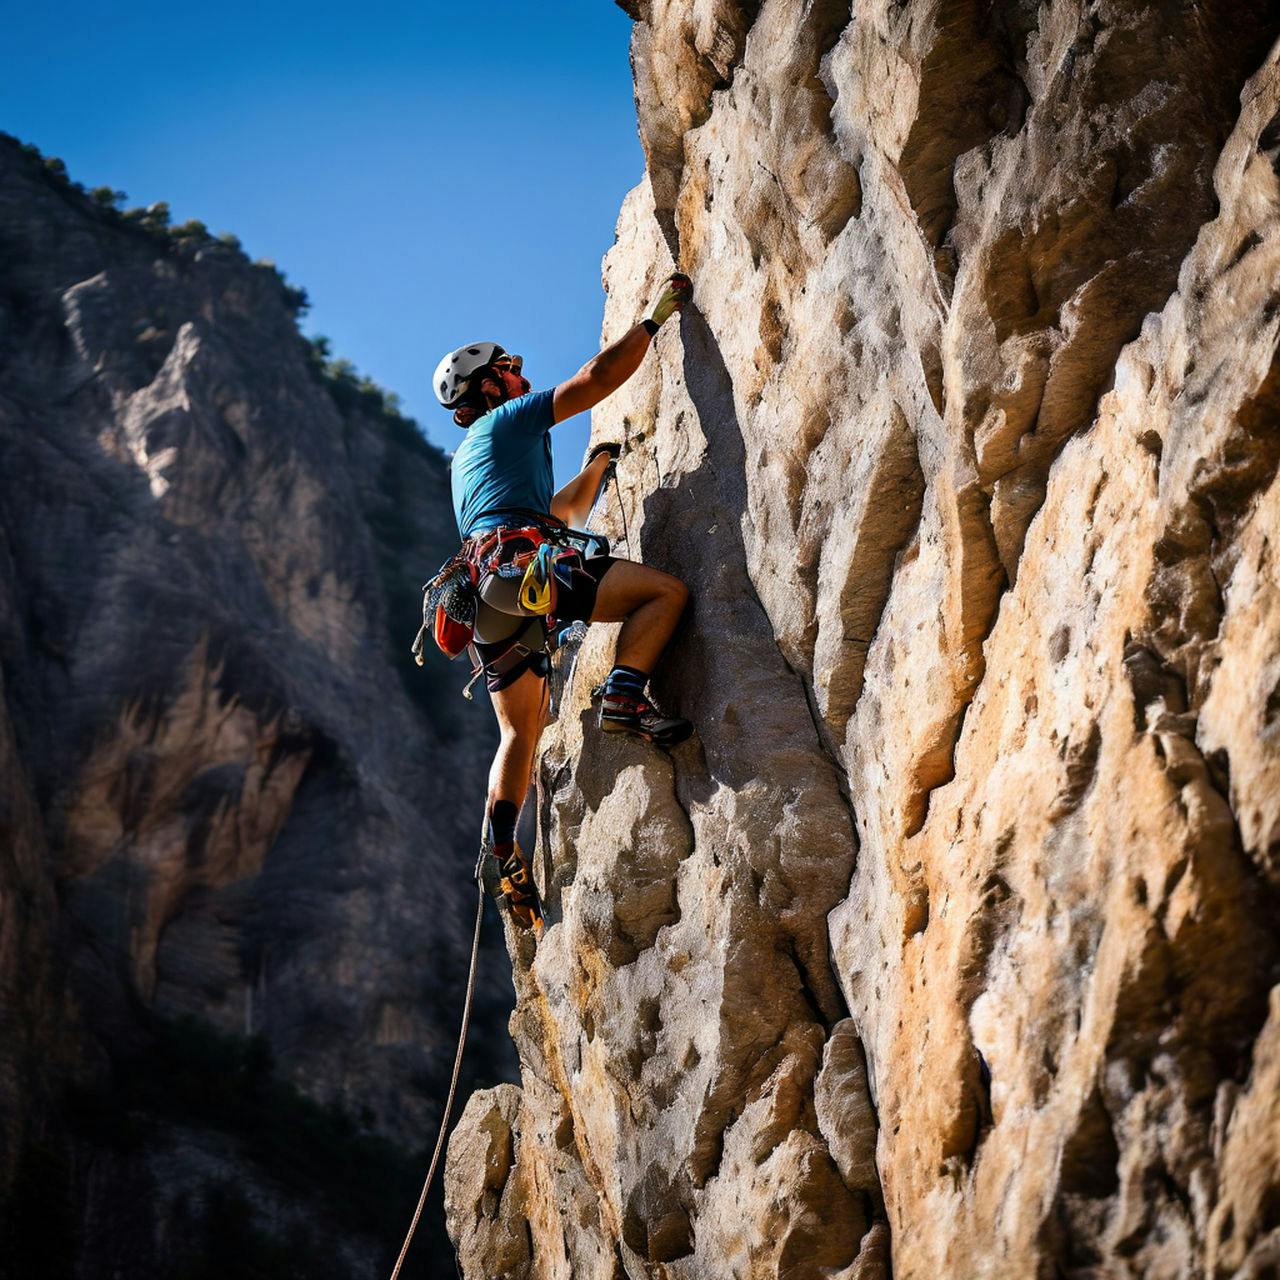 Rock Climber Scaling a Rugged Cliff Face